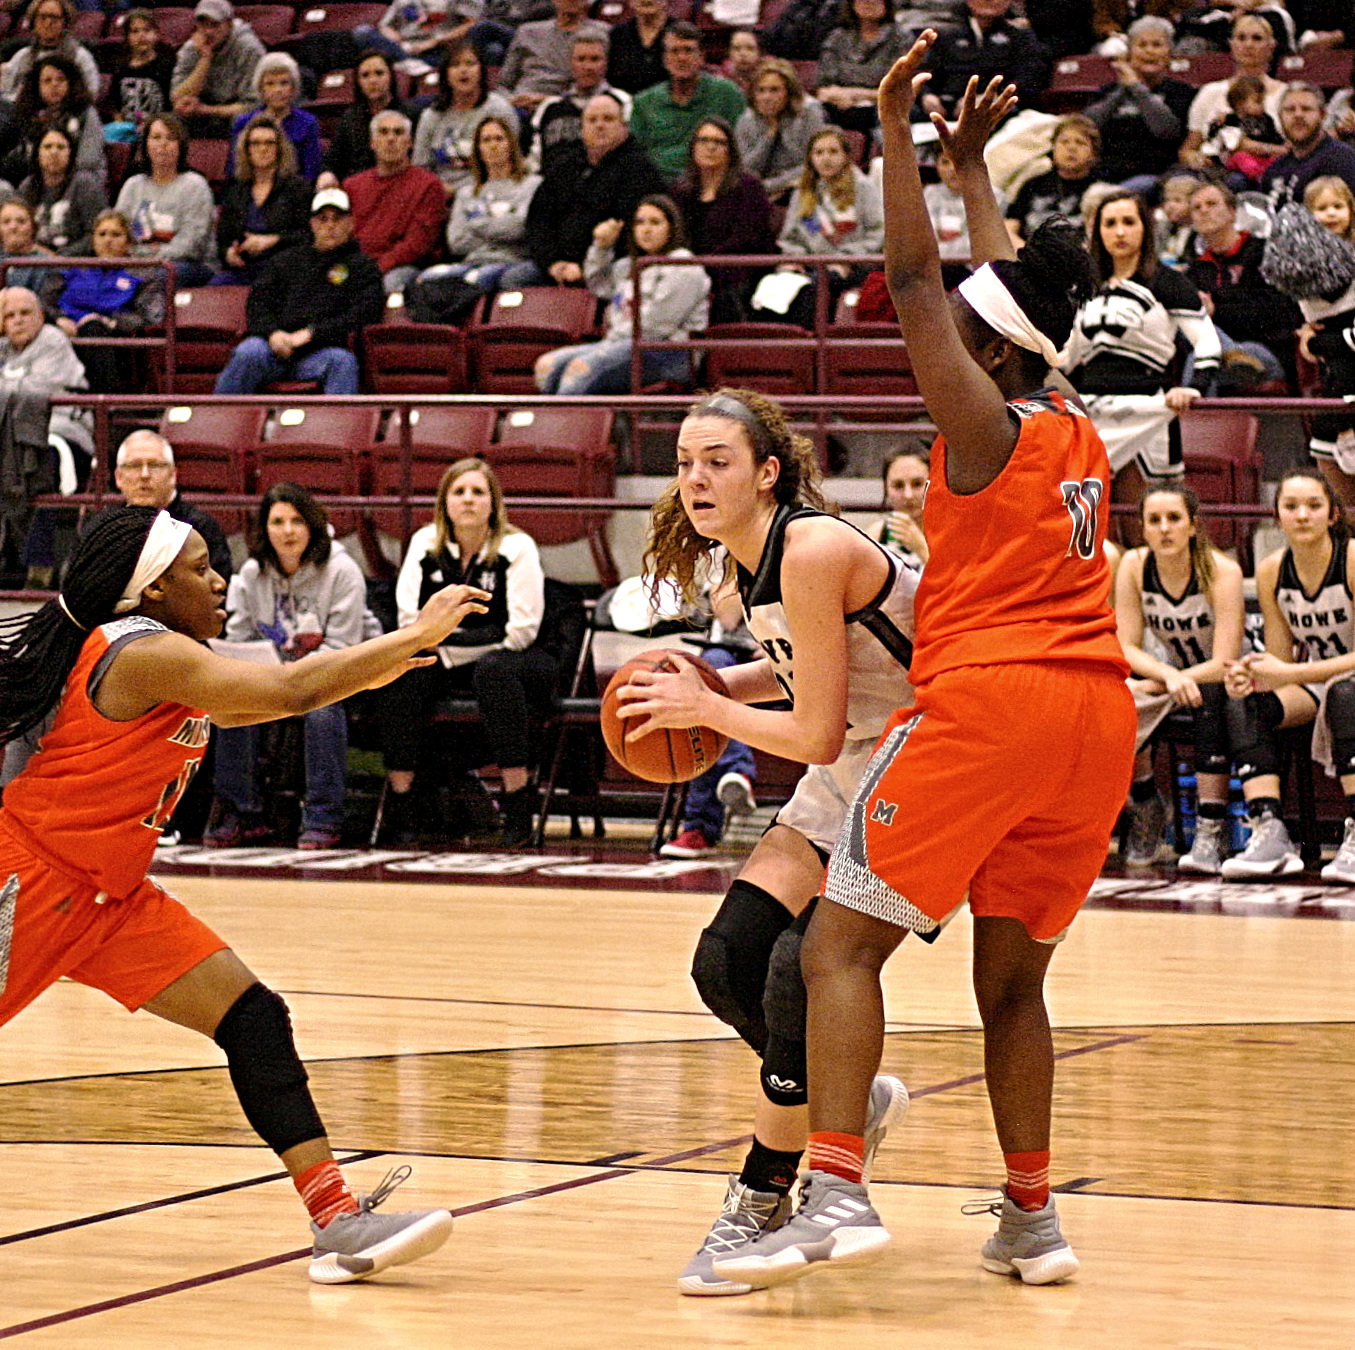 Tiara Stephens stops the ball while Jessiah Riley closes for a steal.